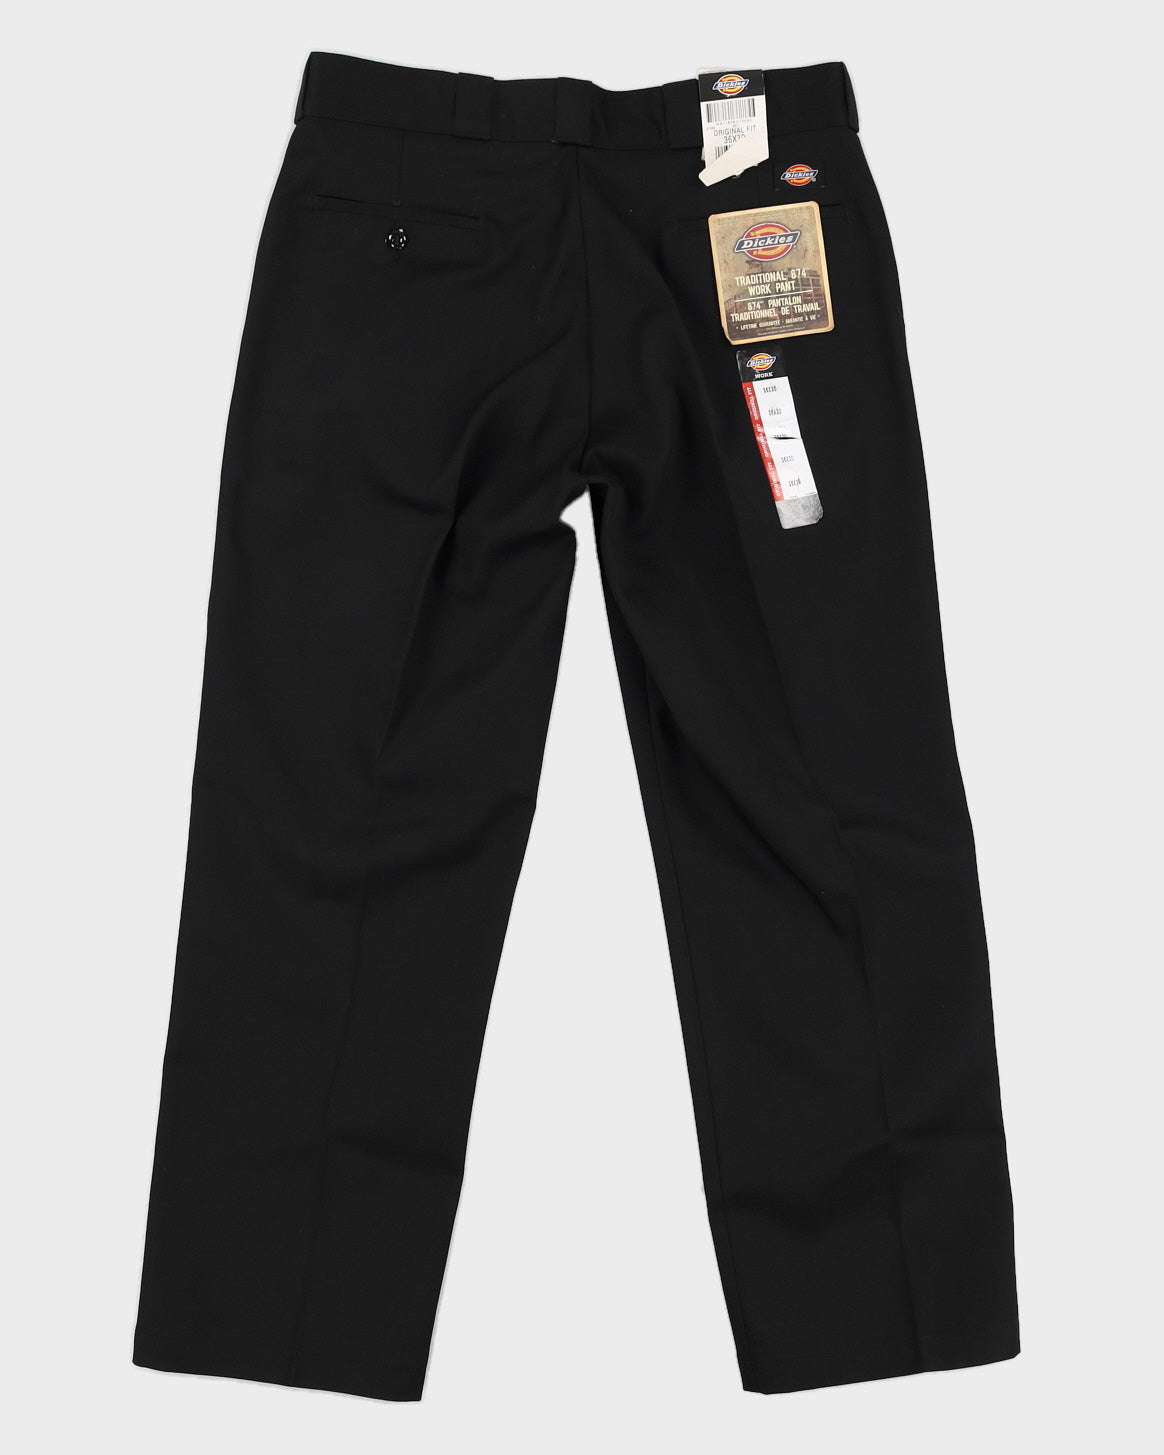 00s 874 Dickies Black Trousers Deadstock With Tags  - W36 L30